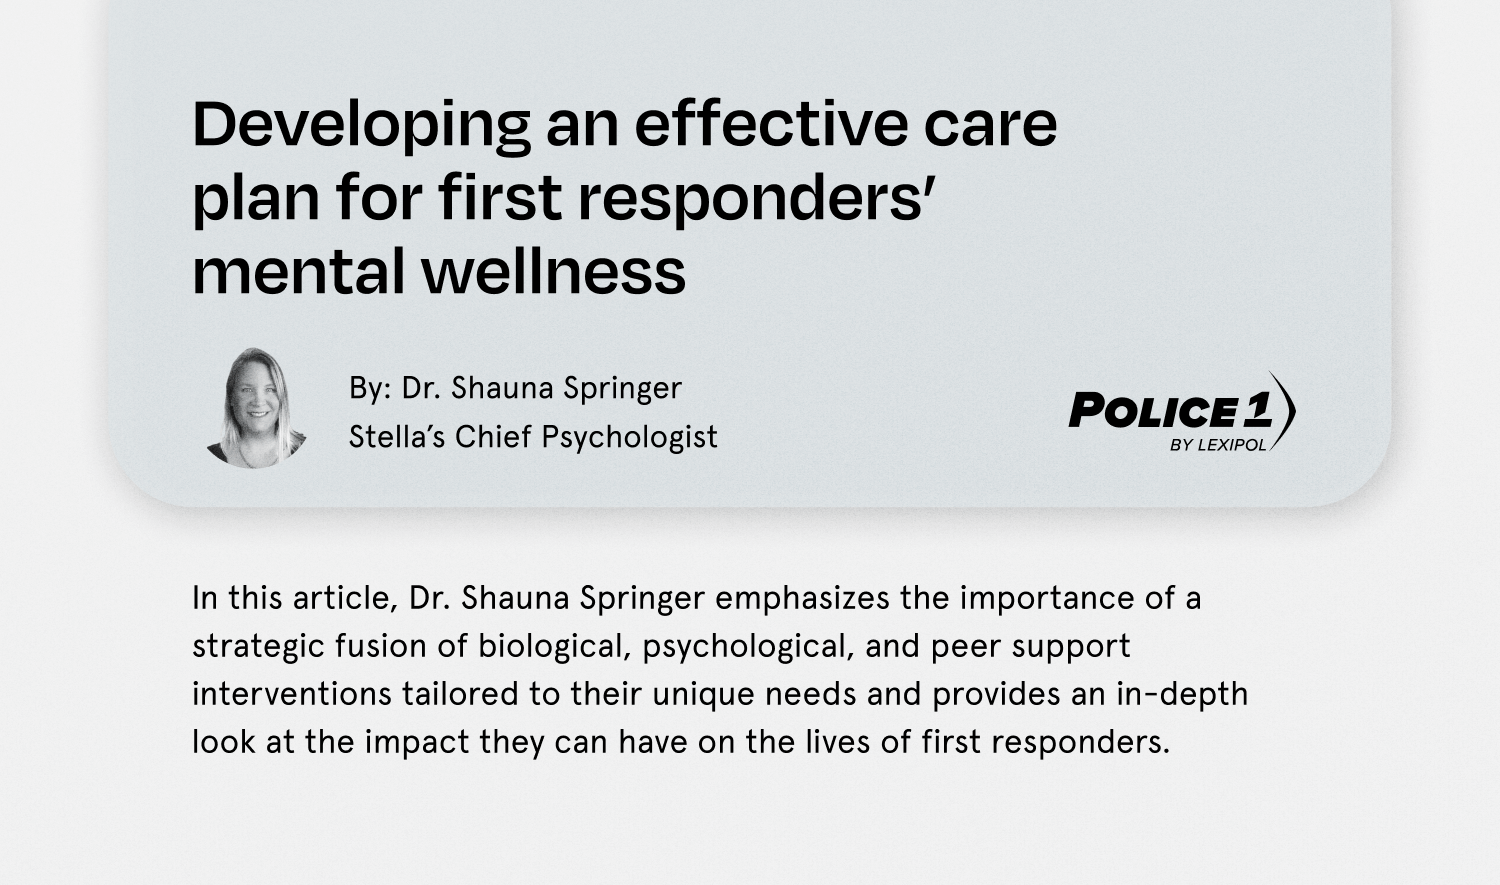 Developing an effective care plan for first responders' mental wellness